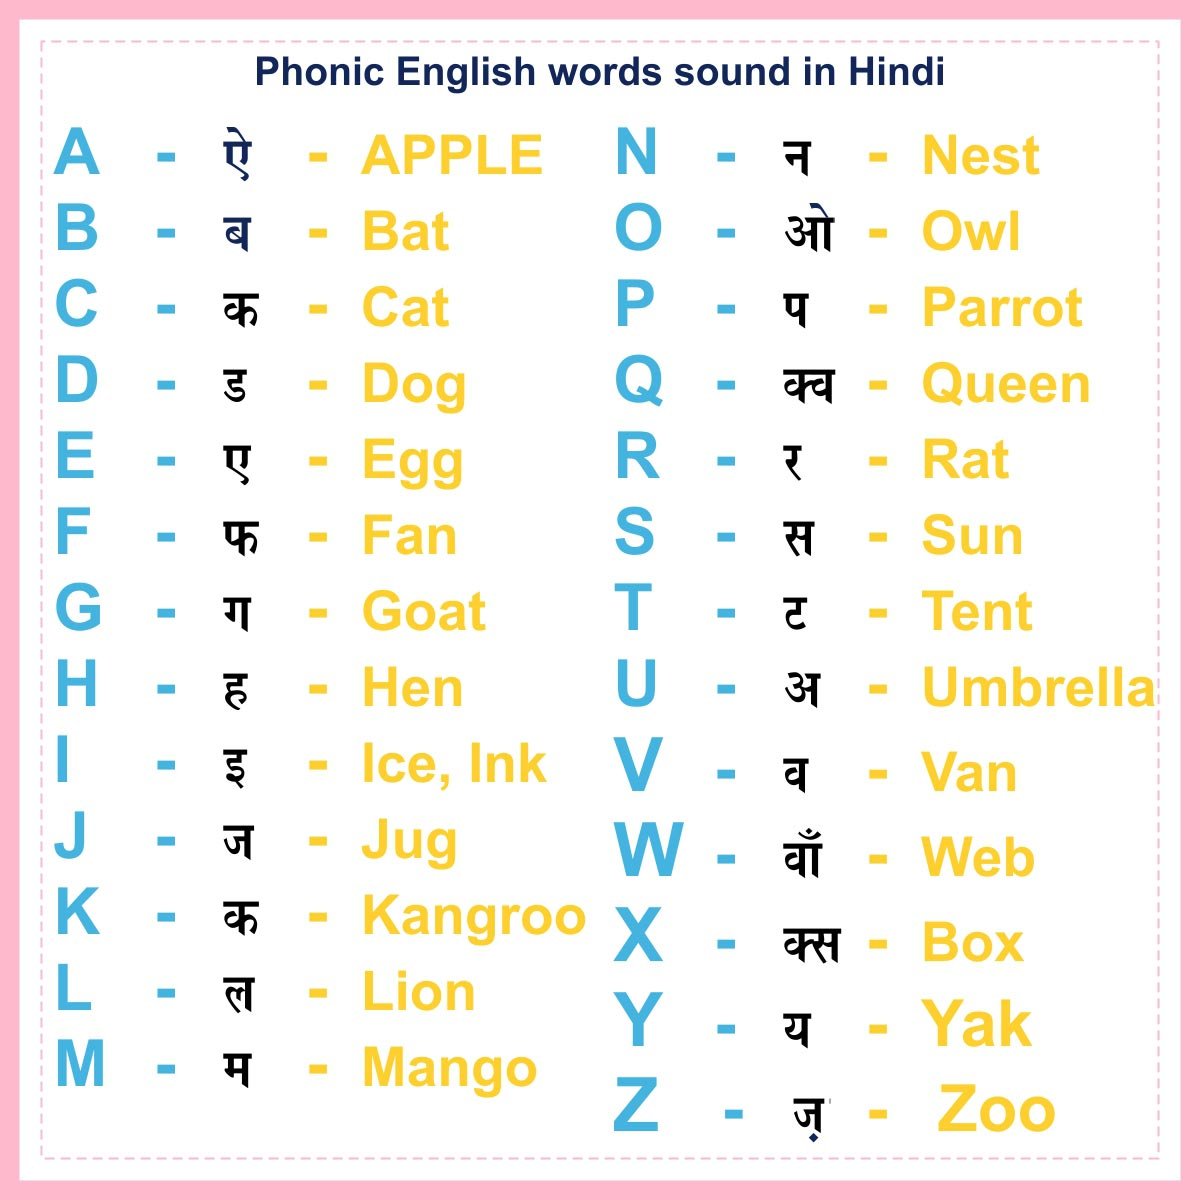 How parents can teach kids phonics sounds in English